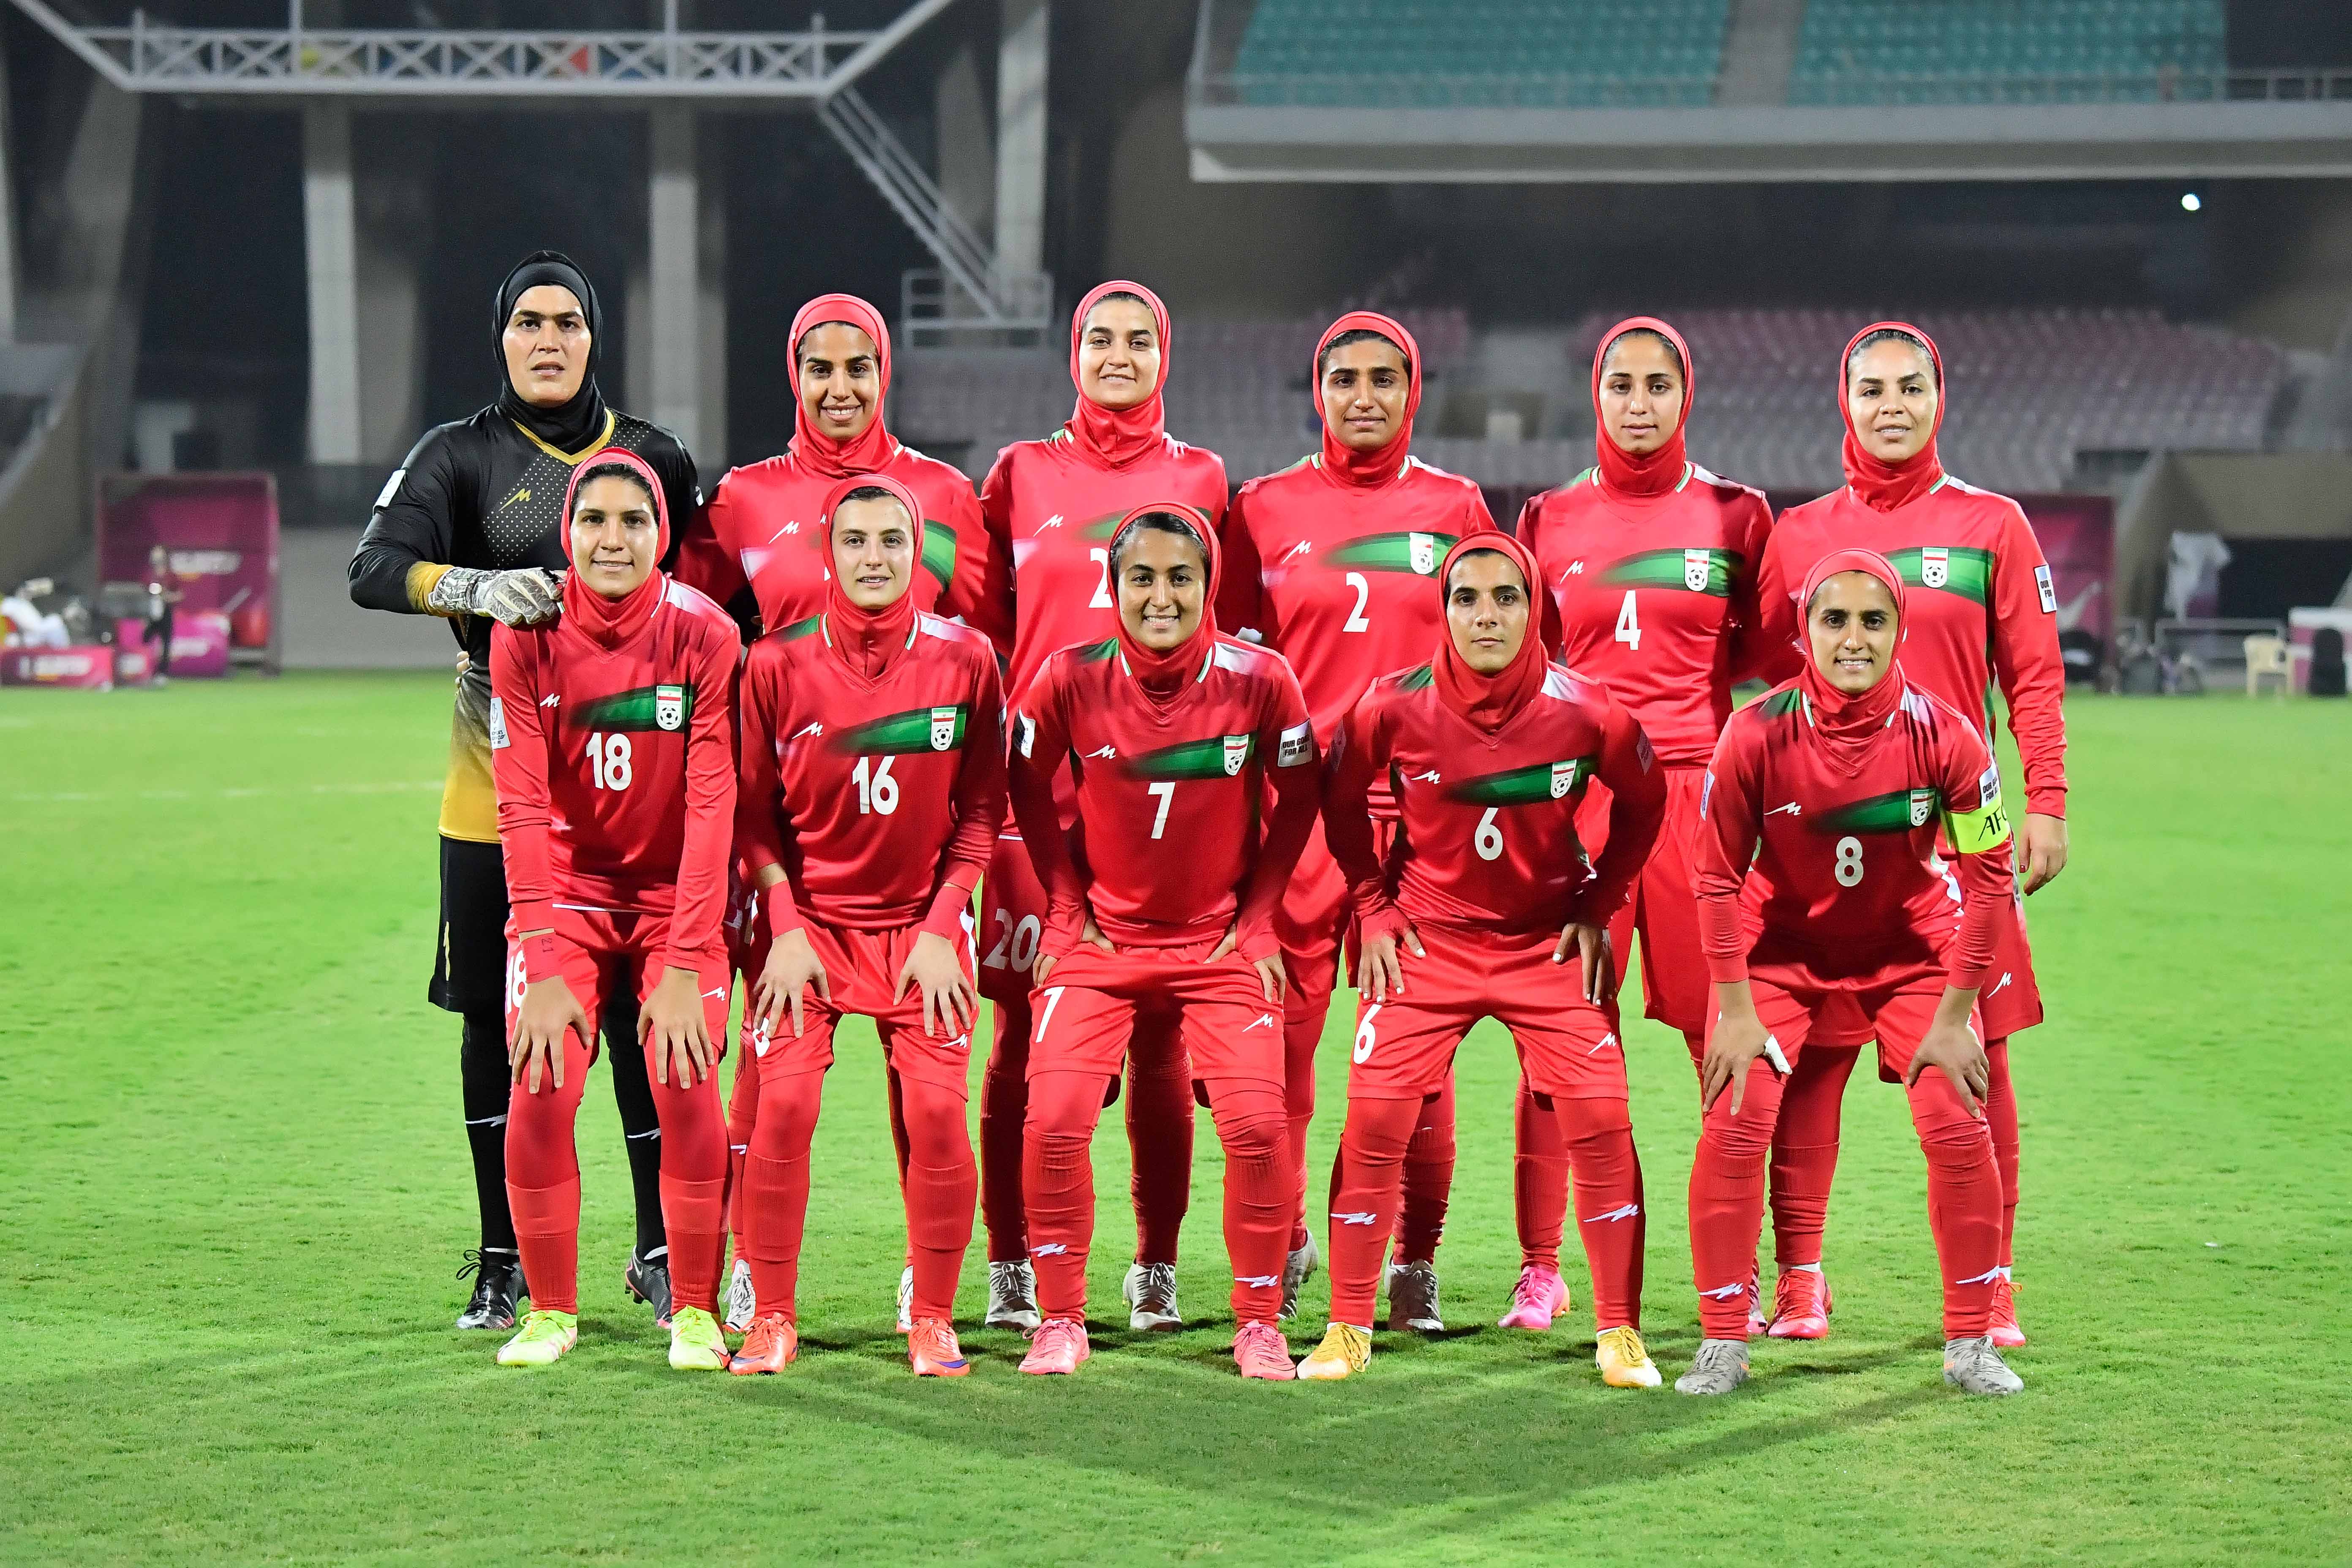 IR Iran players line up for a photo during the AFC Women's Asian Cup Group A match between Chinese Taipei and Iran at DY Patil Stadium on January 26, 2022 in Navi Mumbai, India.